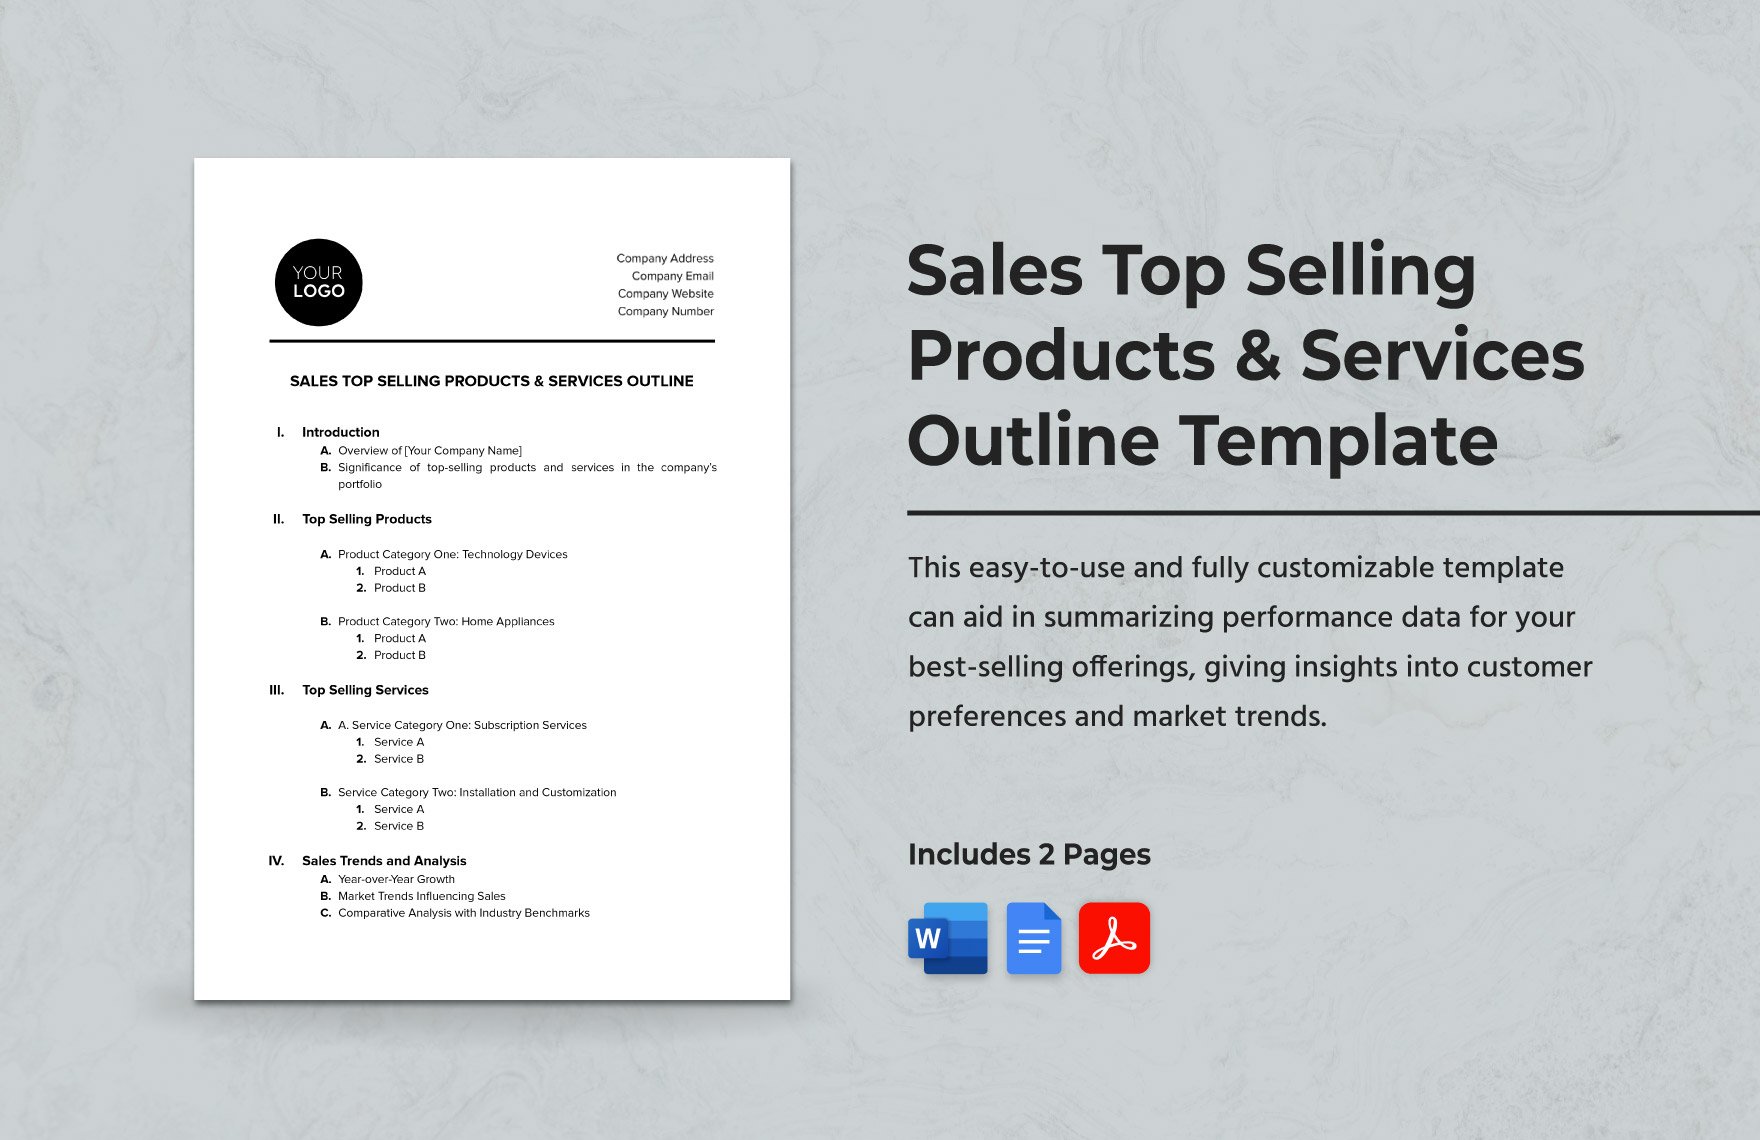 Sales Top Selling Products & Services Outline Template